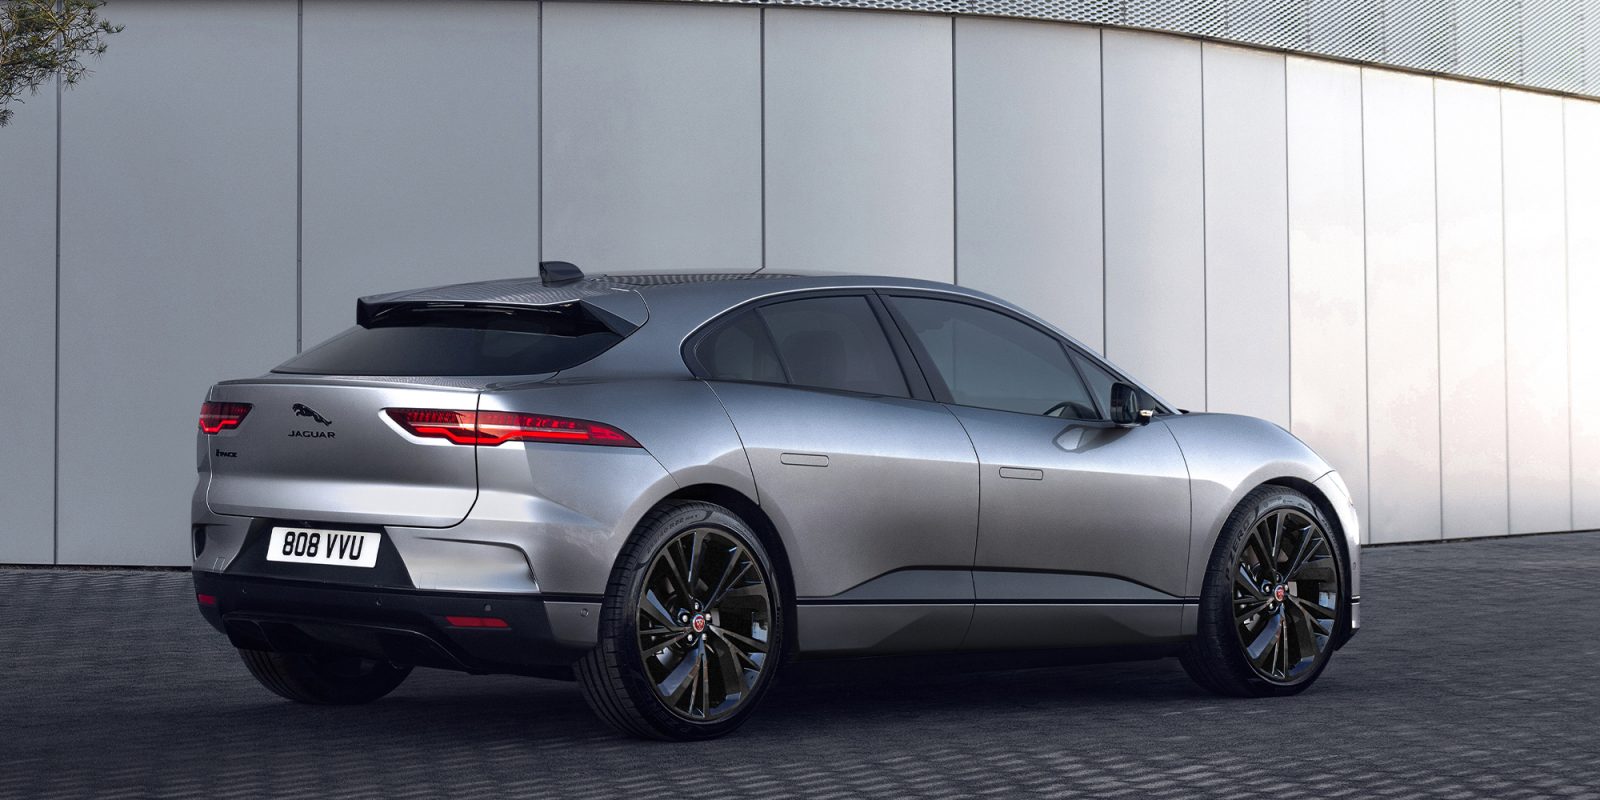 Jaguar introduces premium 'Black Pack' option for I-Pace with gloss black  22"wheels, rear spoiler, air suspension, and Amazon Alexa | Electrek